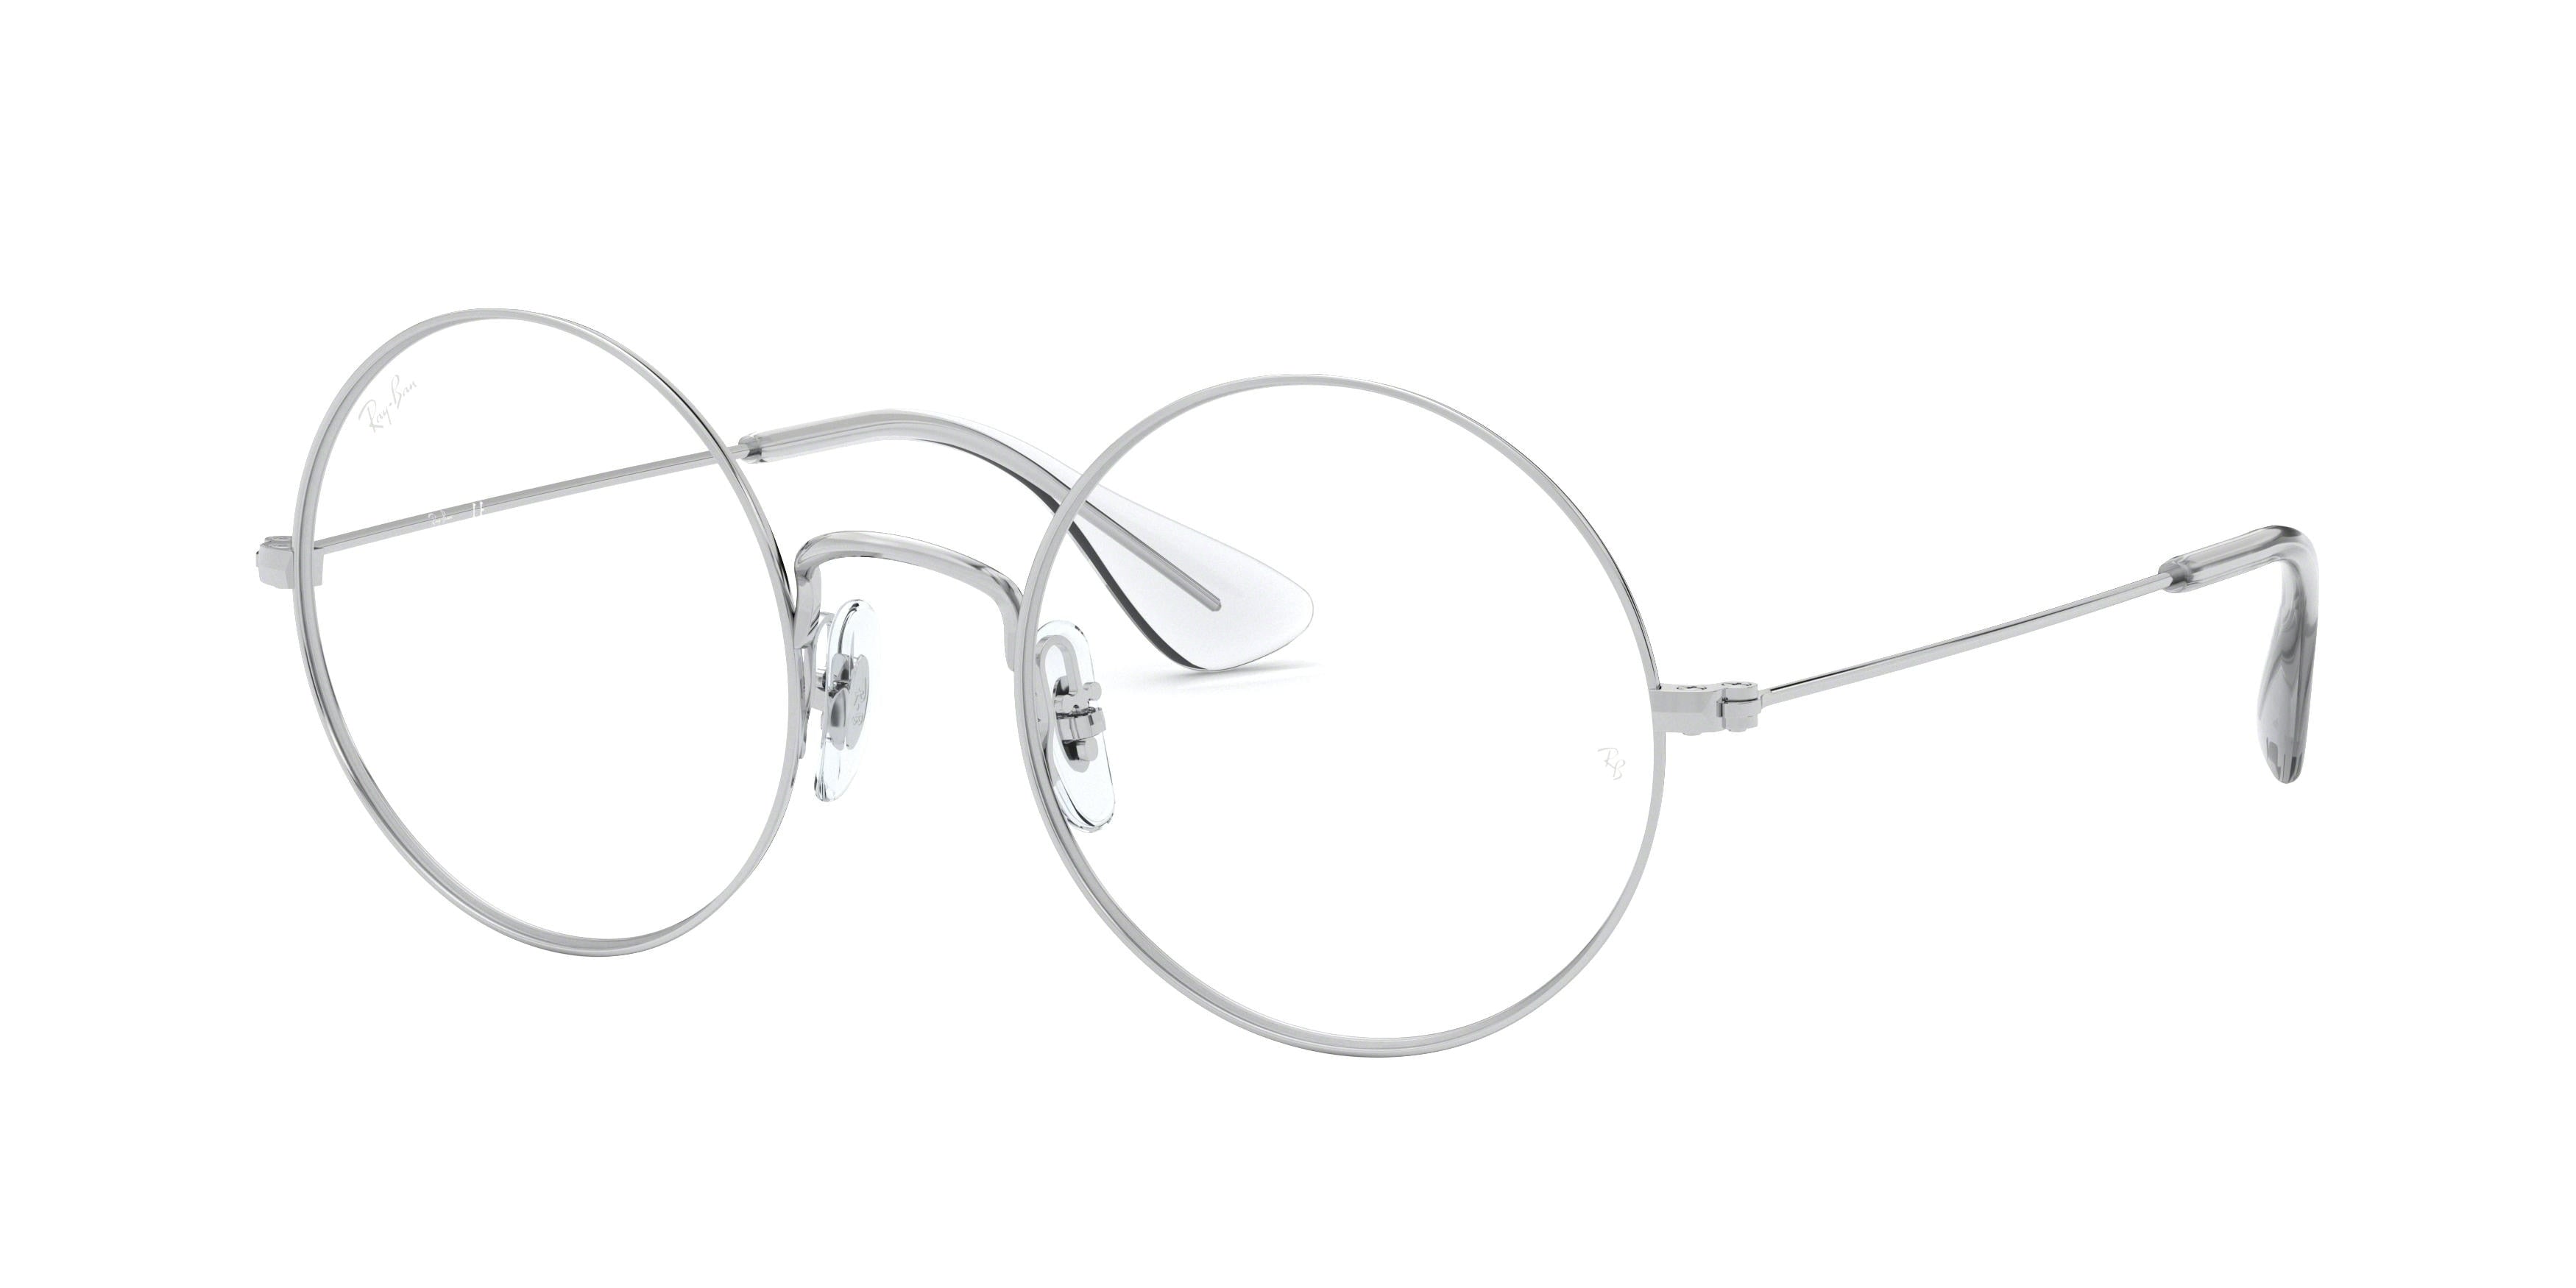 Ray-Ban Optical JA-JO RX6392 Round Eyeglasses  2968-Silver 53-145-20 - Color Map Silver